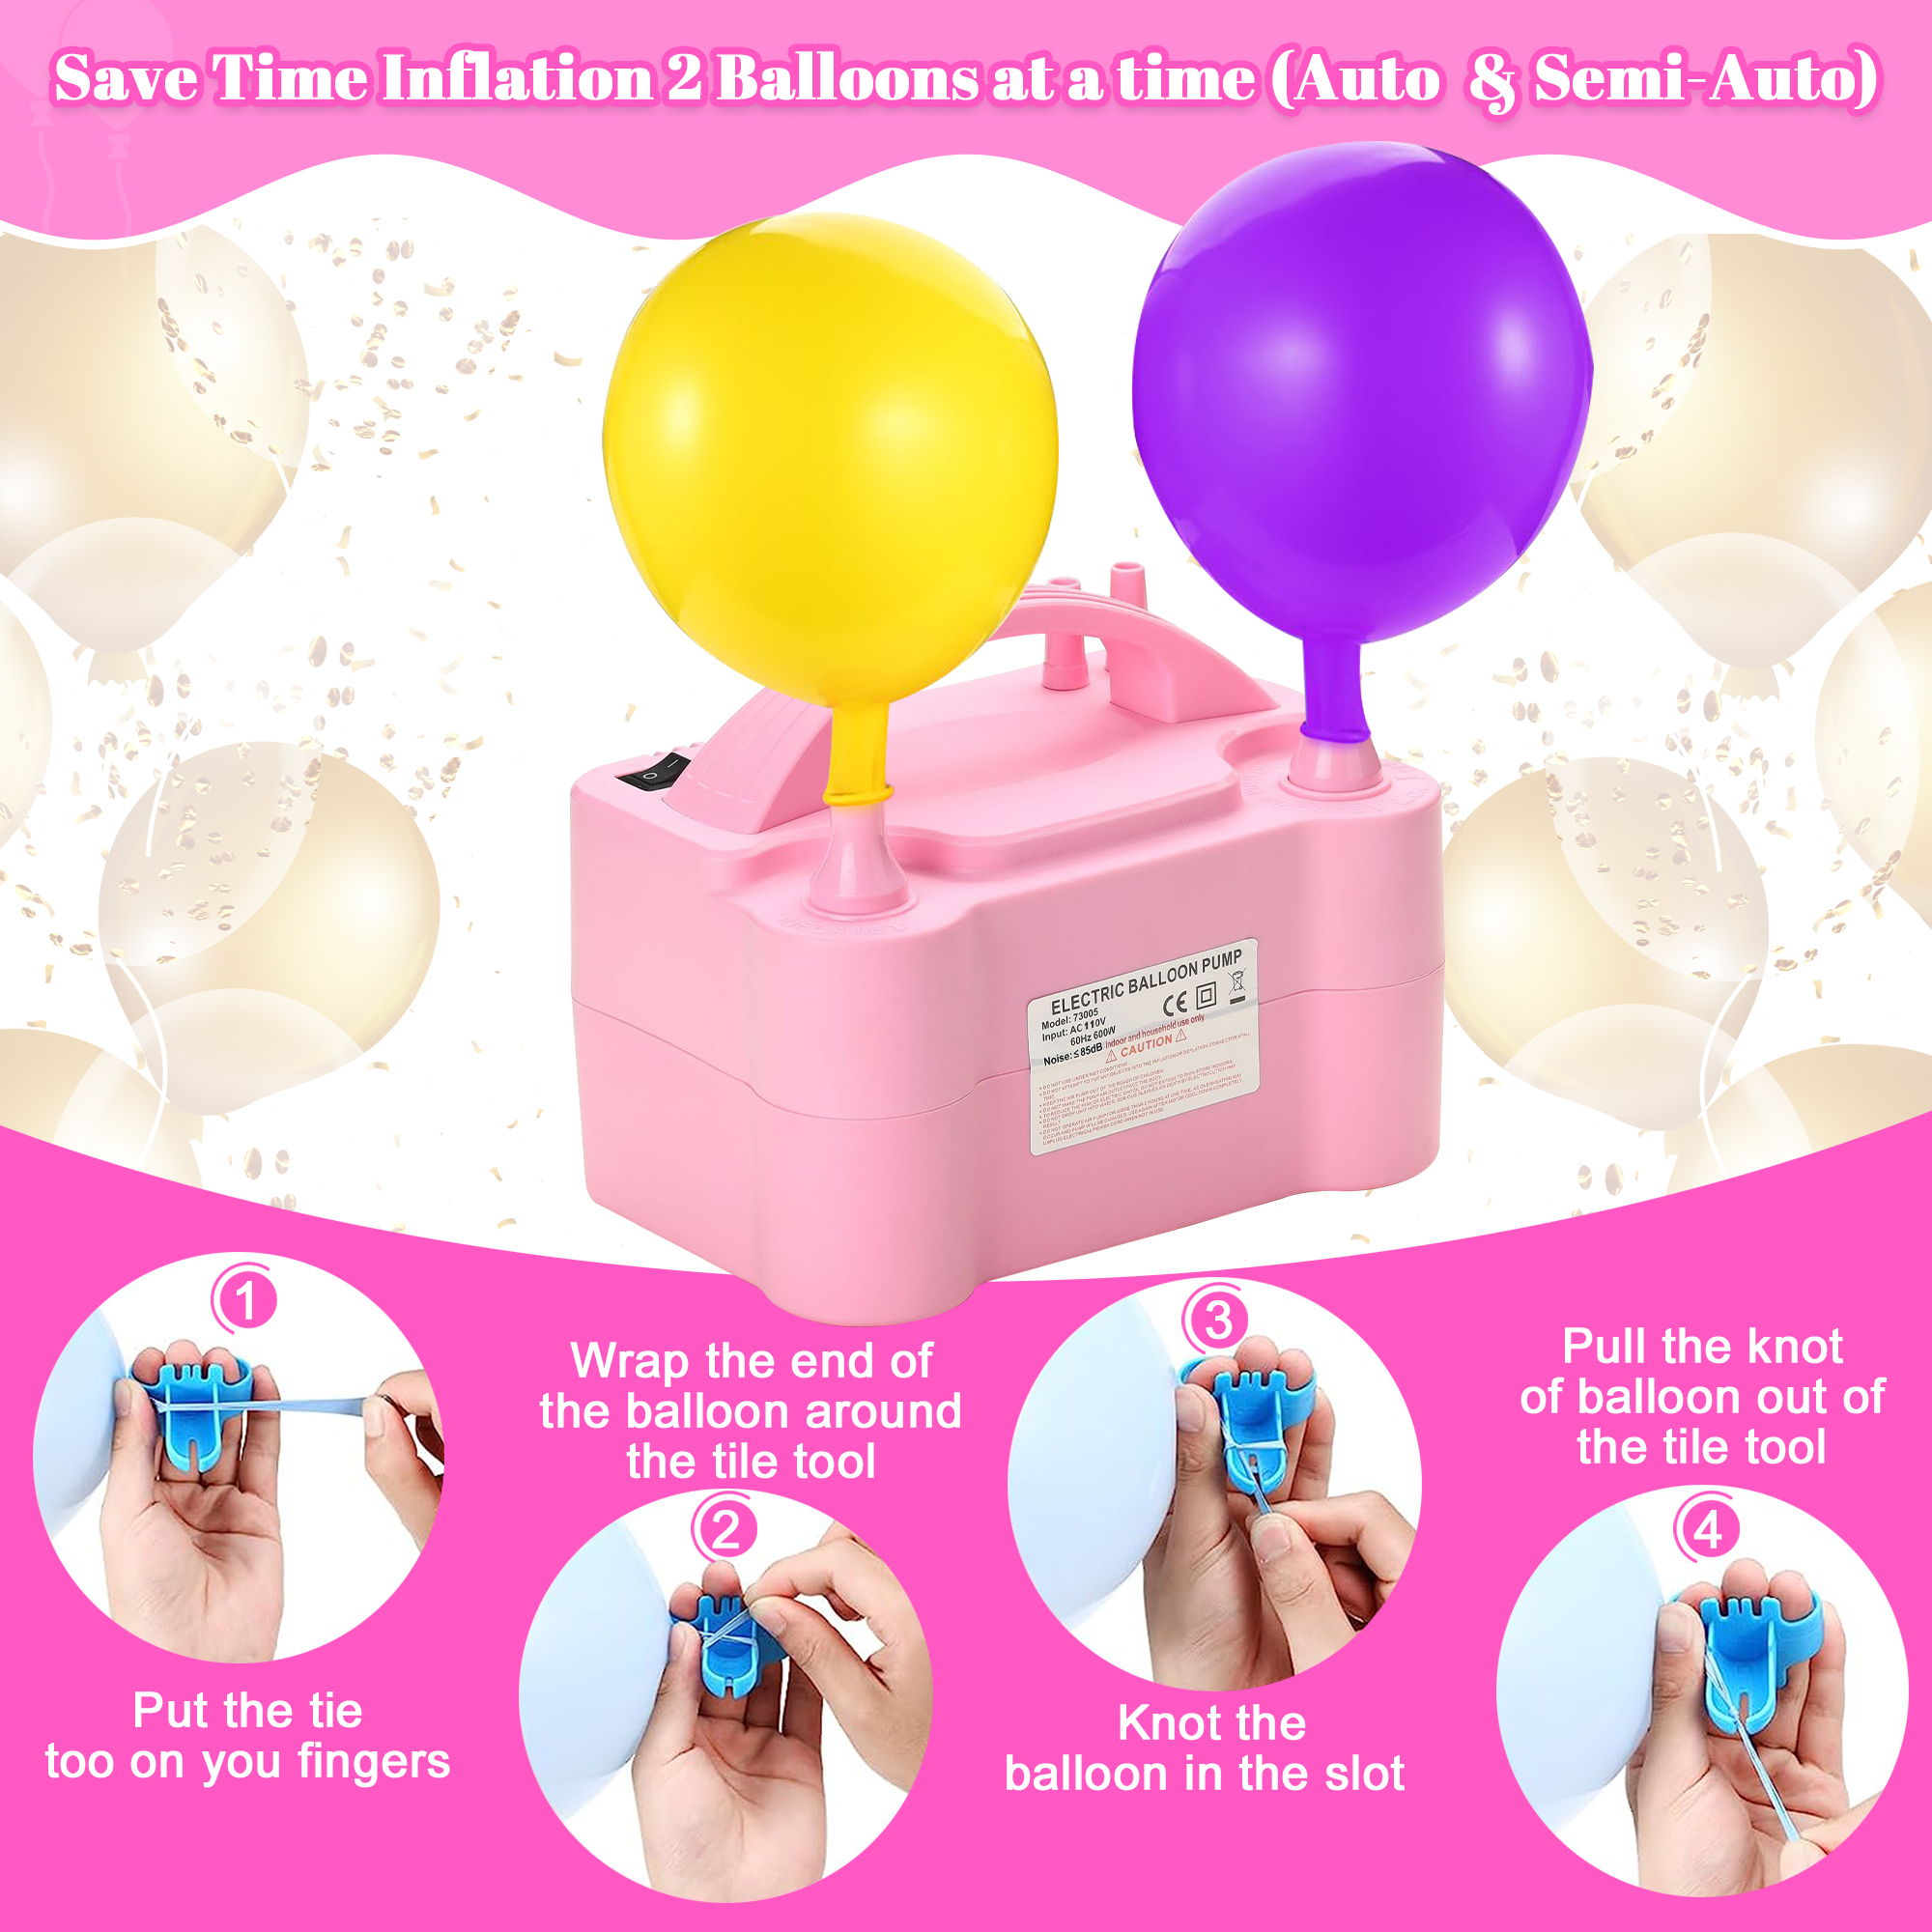 IZNEN Electric Balloon Pump, Portable Dual Nozzle Blower Air Balloon Pump & Inflator for All Balloons Party Wedding Decoration 110V, 600W, Pink - image 3 of 8